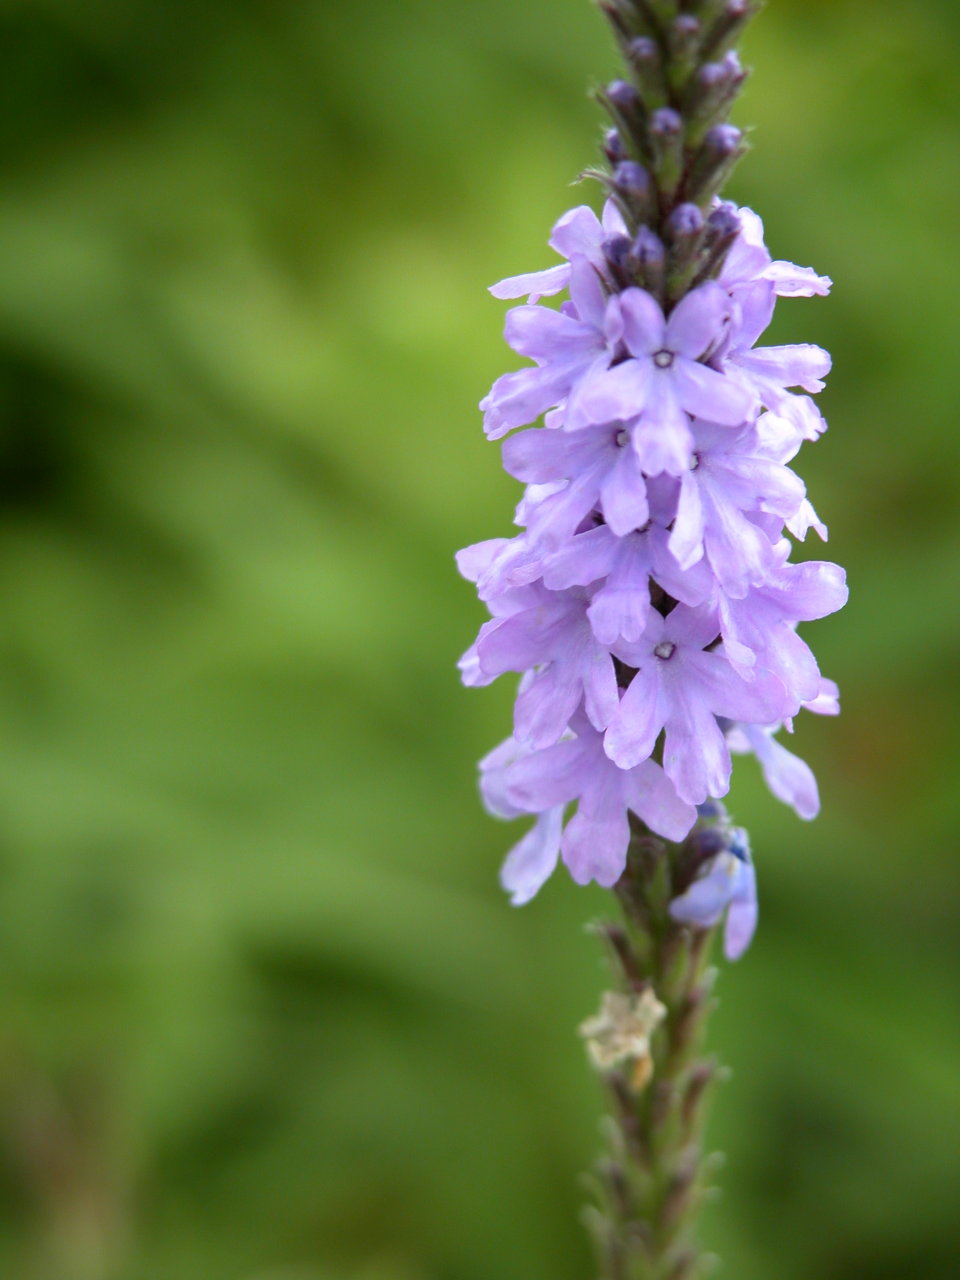 Narrow-Leaved Vervain